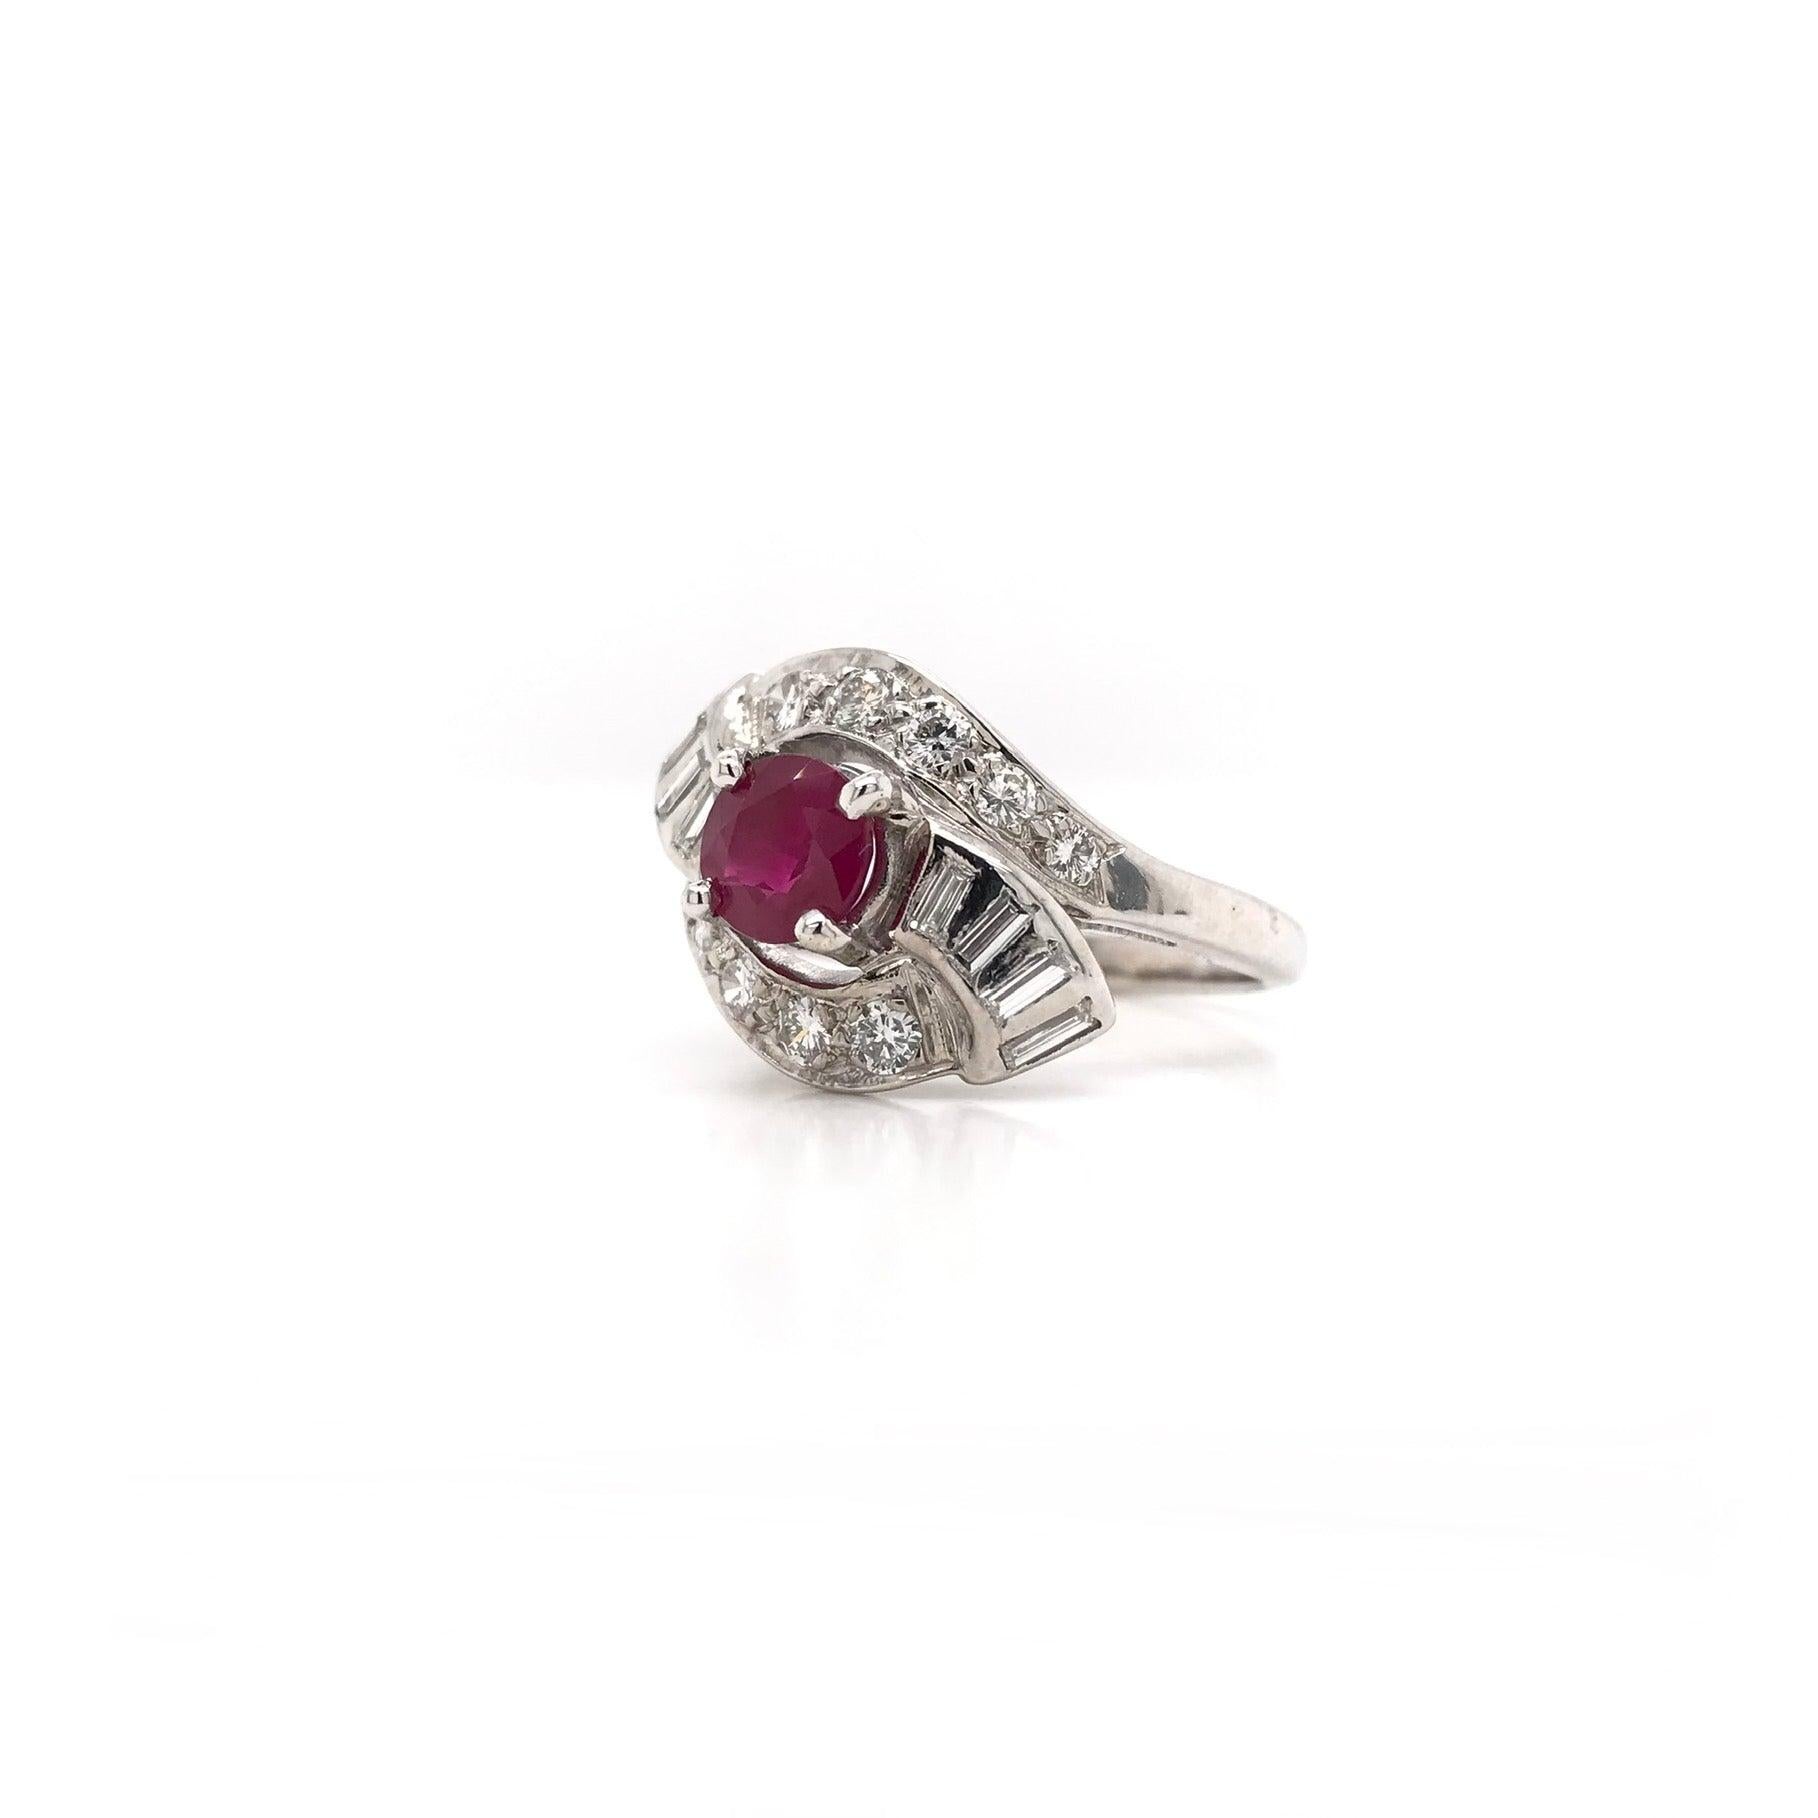 Retro Mid Century 1.01 Carat Ruby and Diamond Ring For Sale